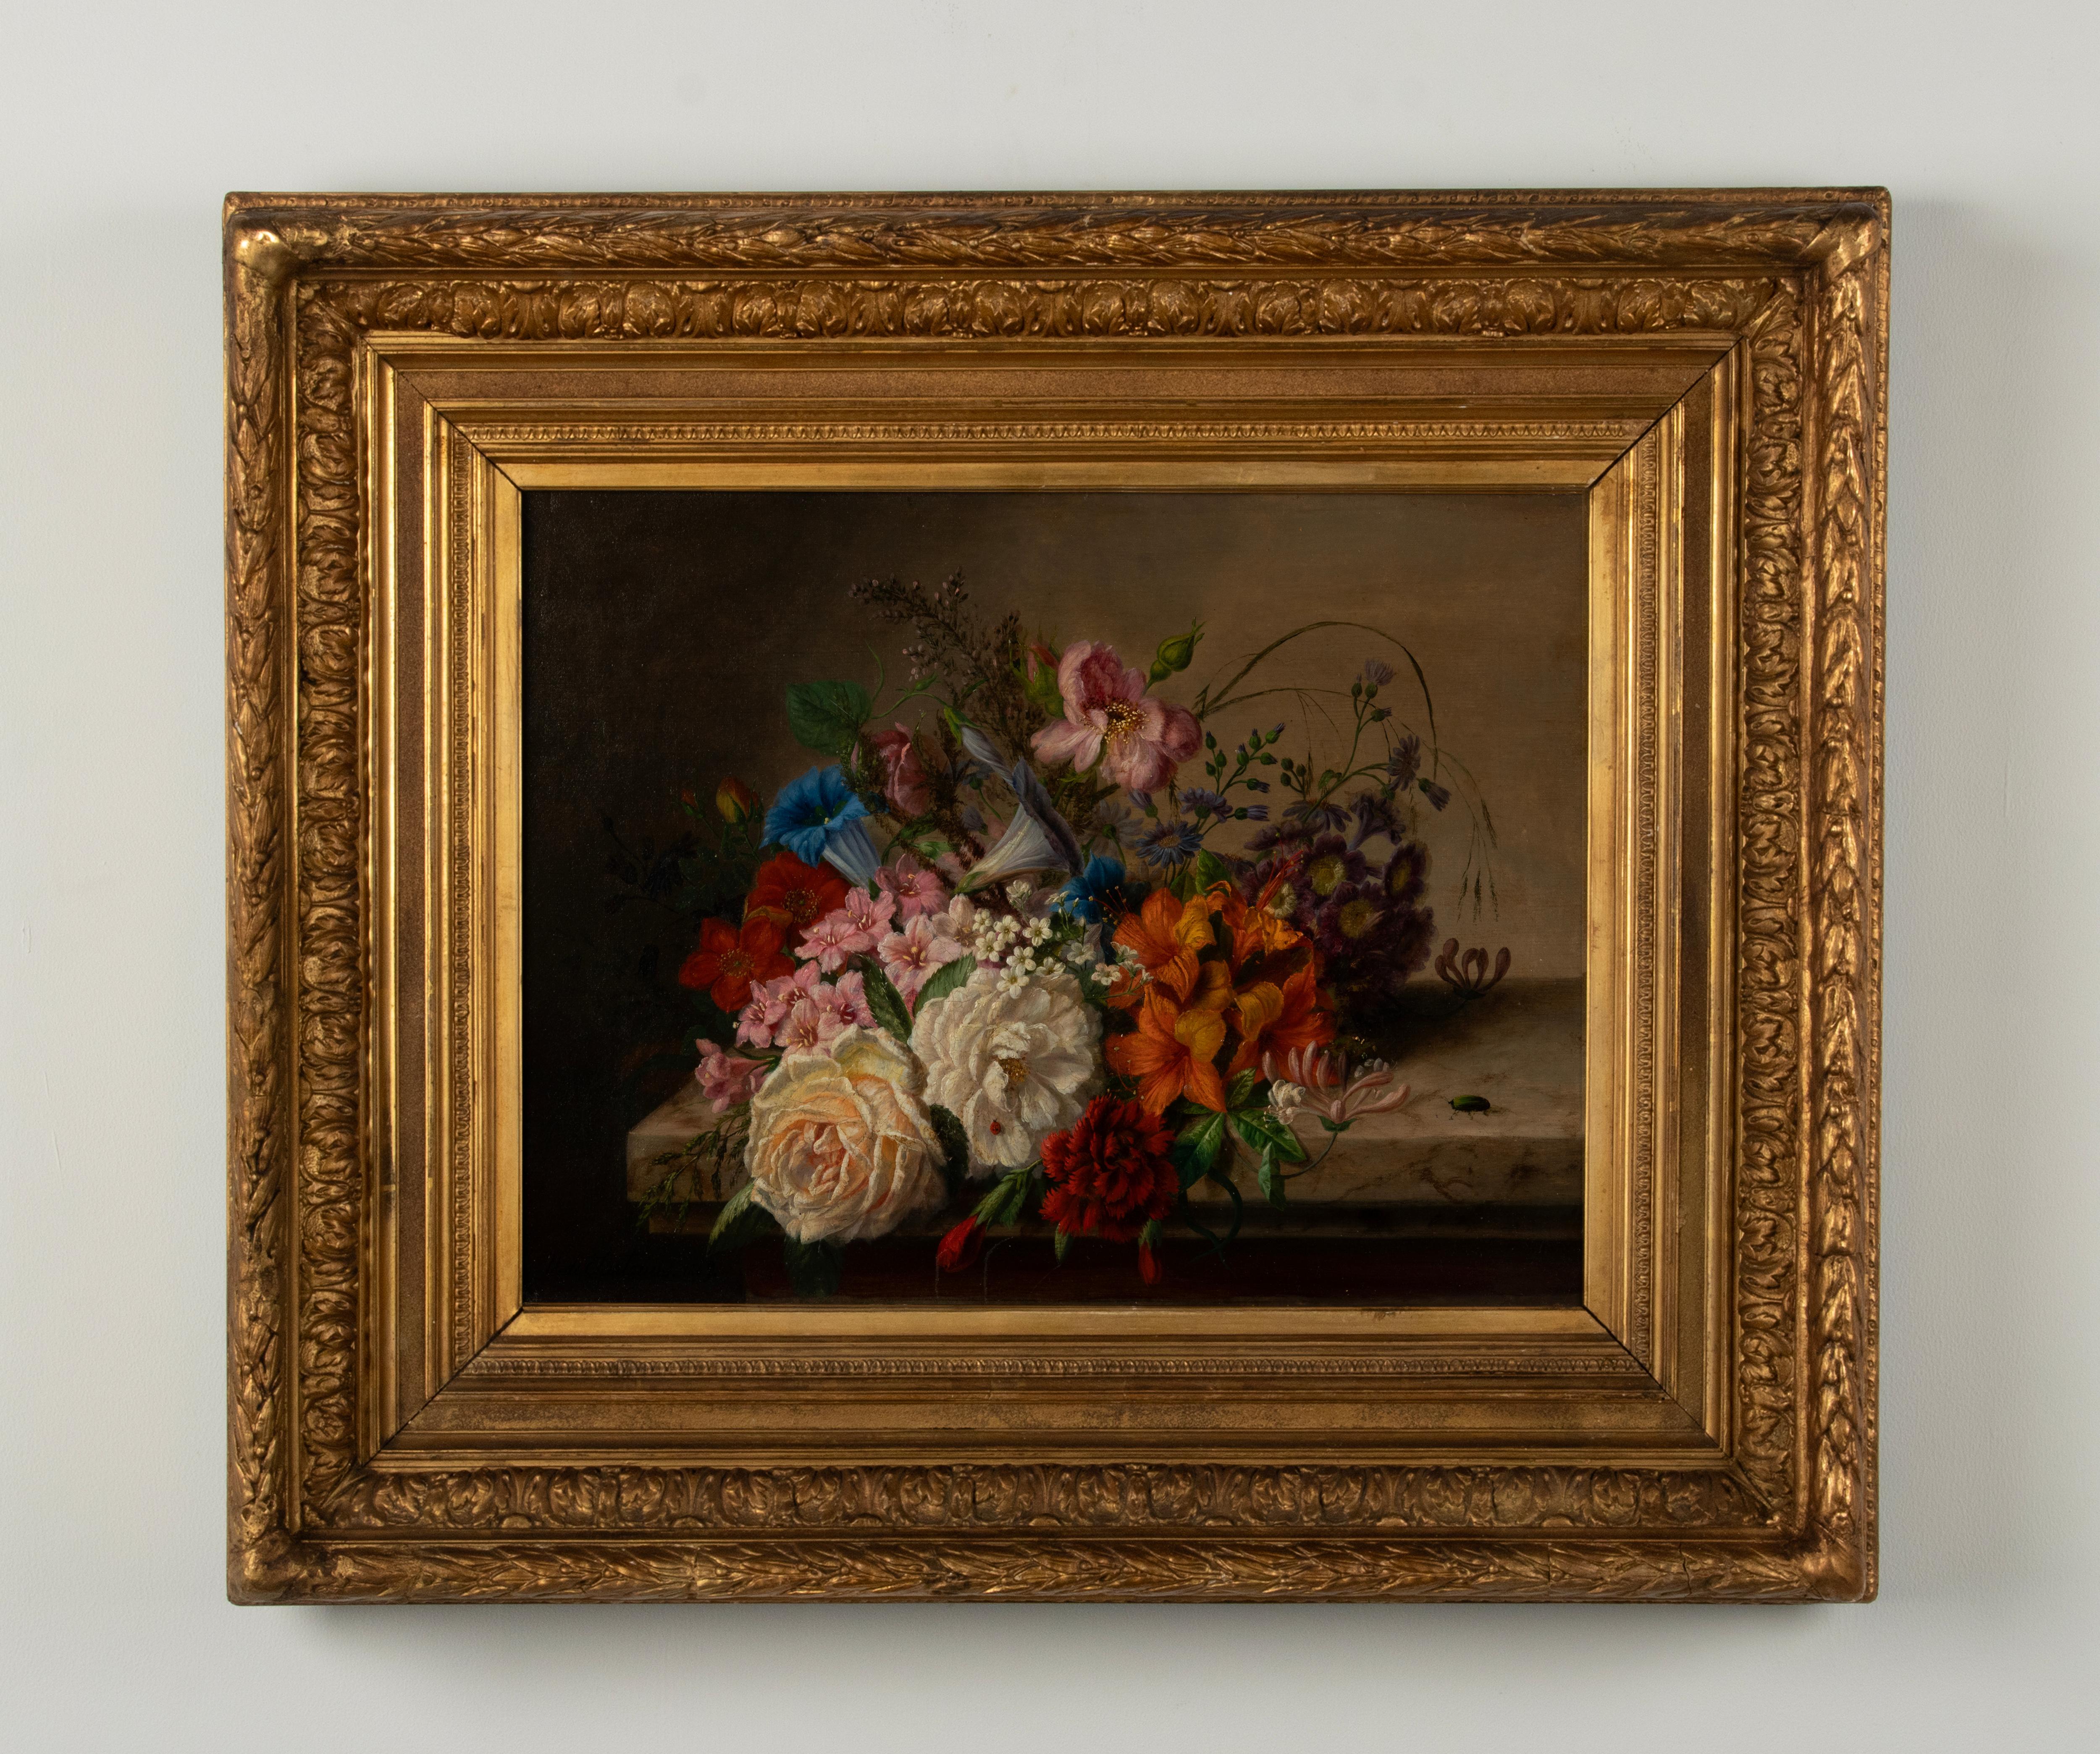 A fine quality oil painting of a flower still life in the tradition of the Dutch/Flemish Renaissance style. 
It is a beautiful antique painting. Great colorful flowers, small insects, painted with a lifelike finesse.
The painting is framed in a